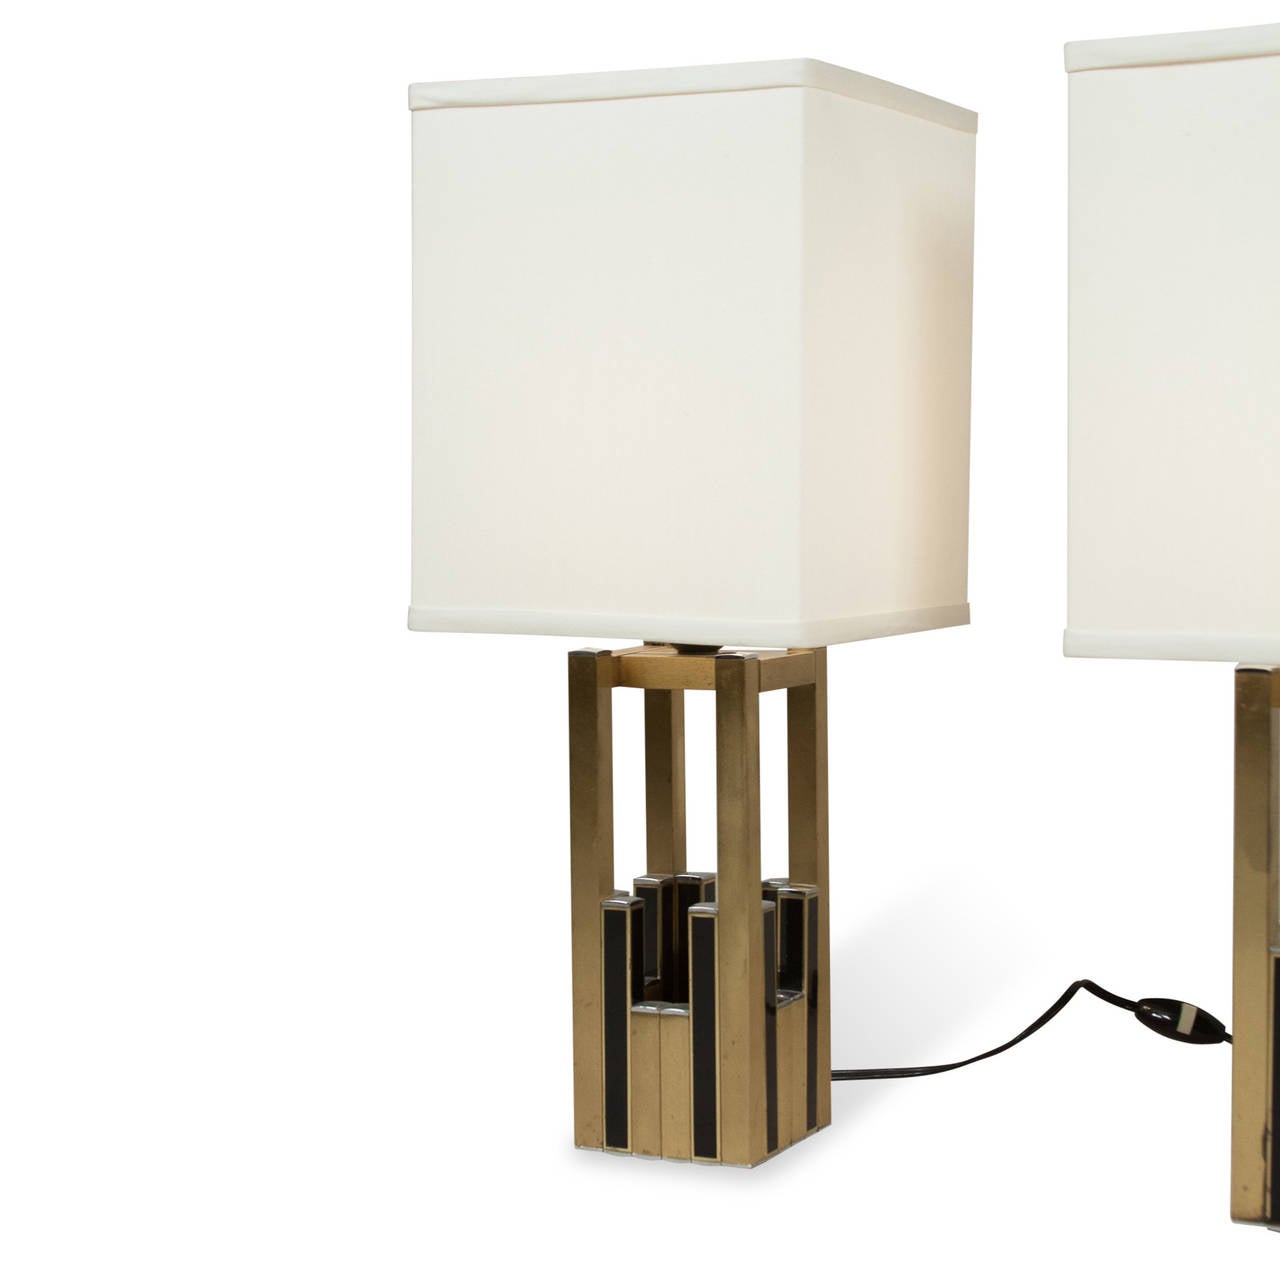 Pair of Lumica Table Lamps In Good Condition For Sale In Brooklyn, NY